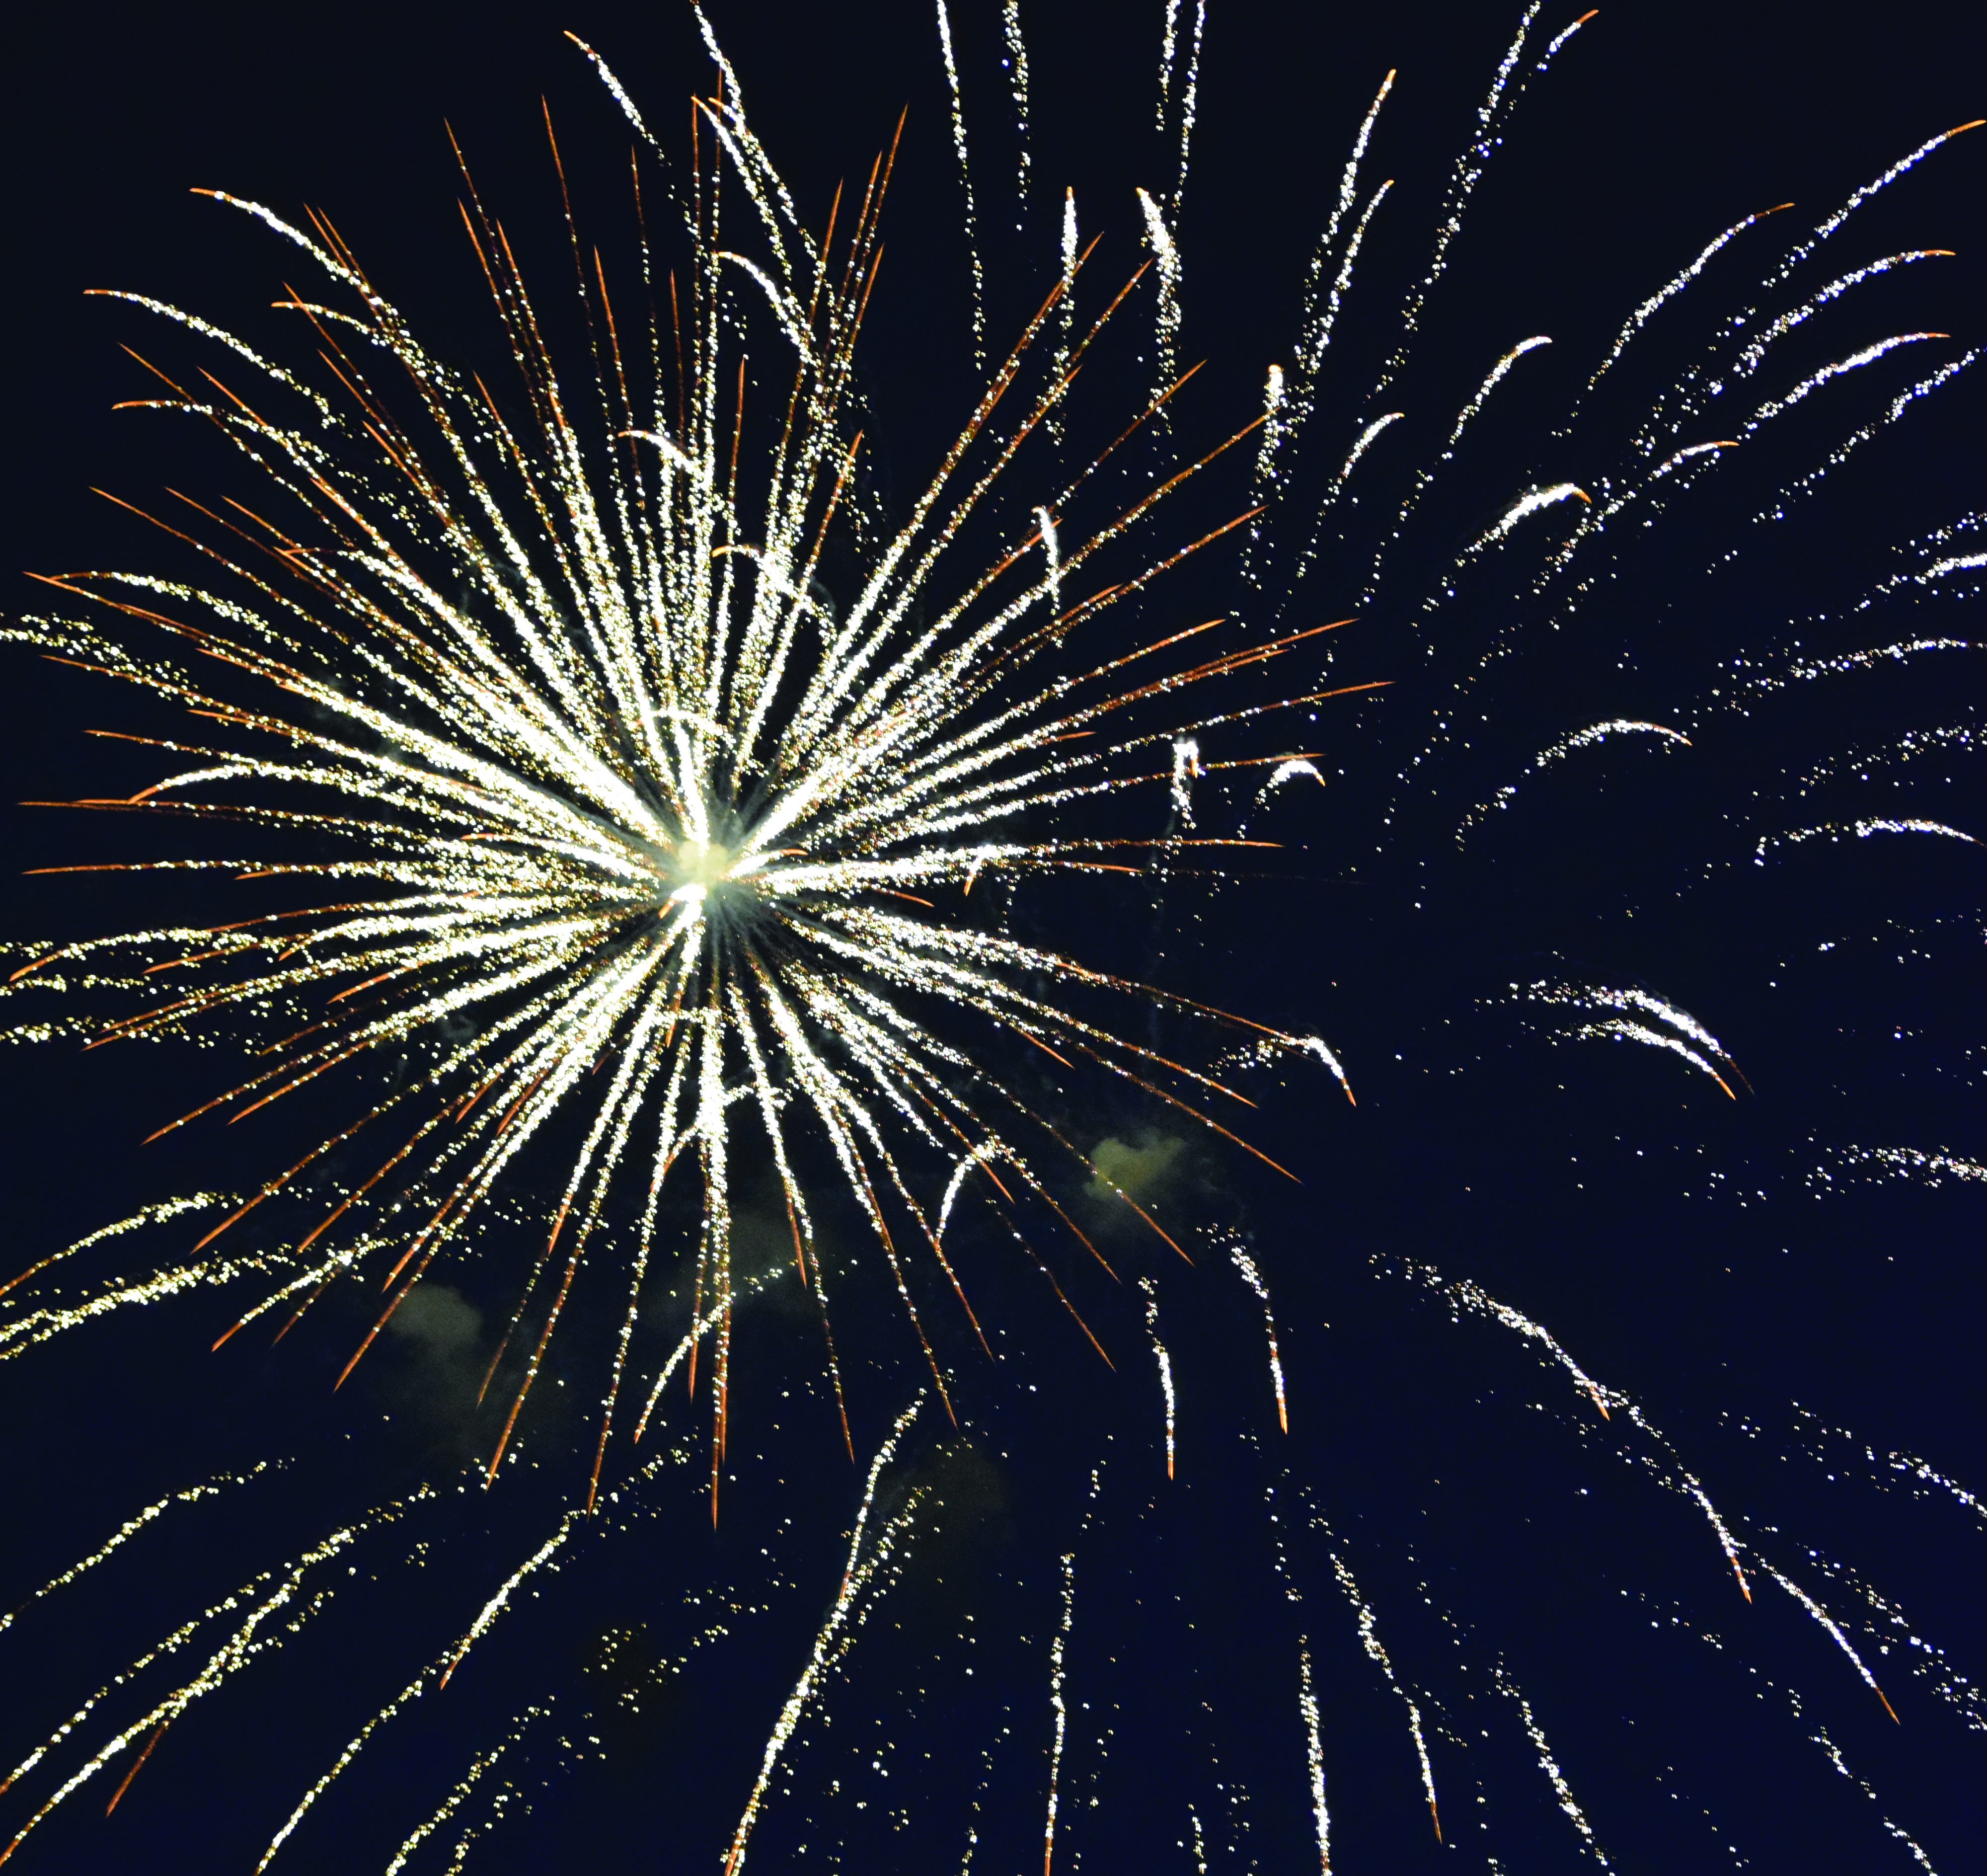 The Highlands Chamber of Commerce has postponed the fireworks show scheduled for Labor Day weekend.